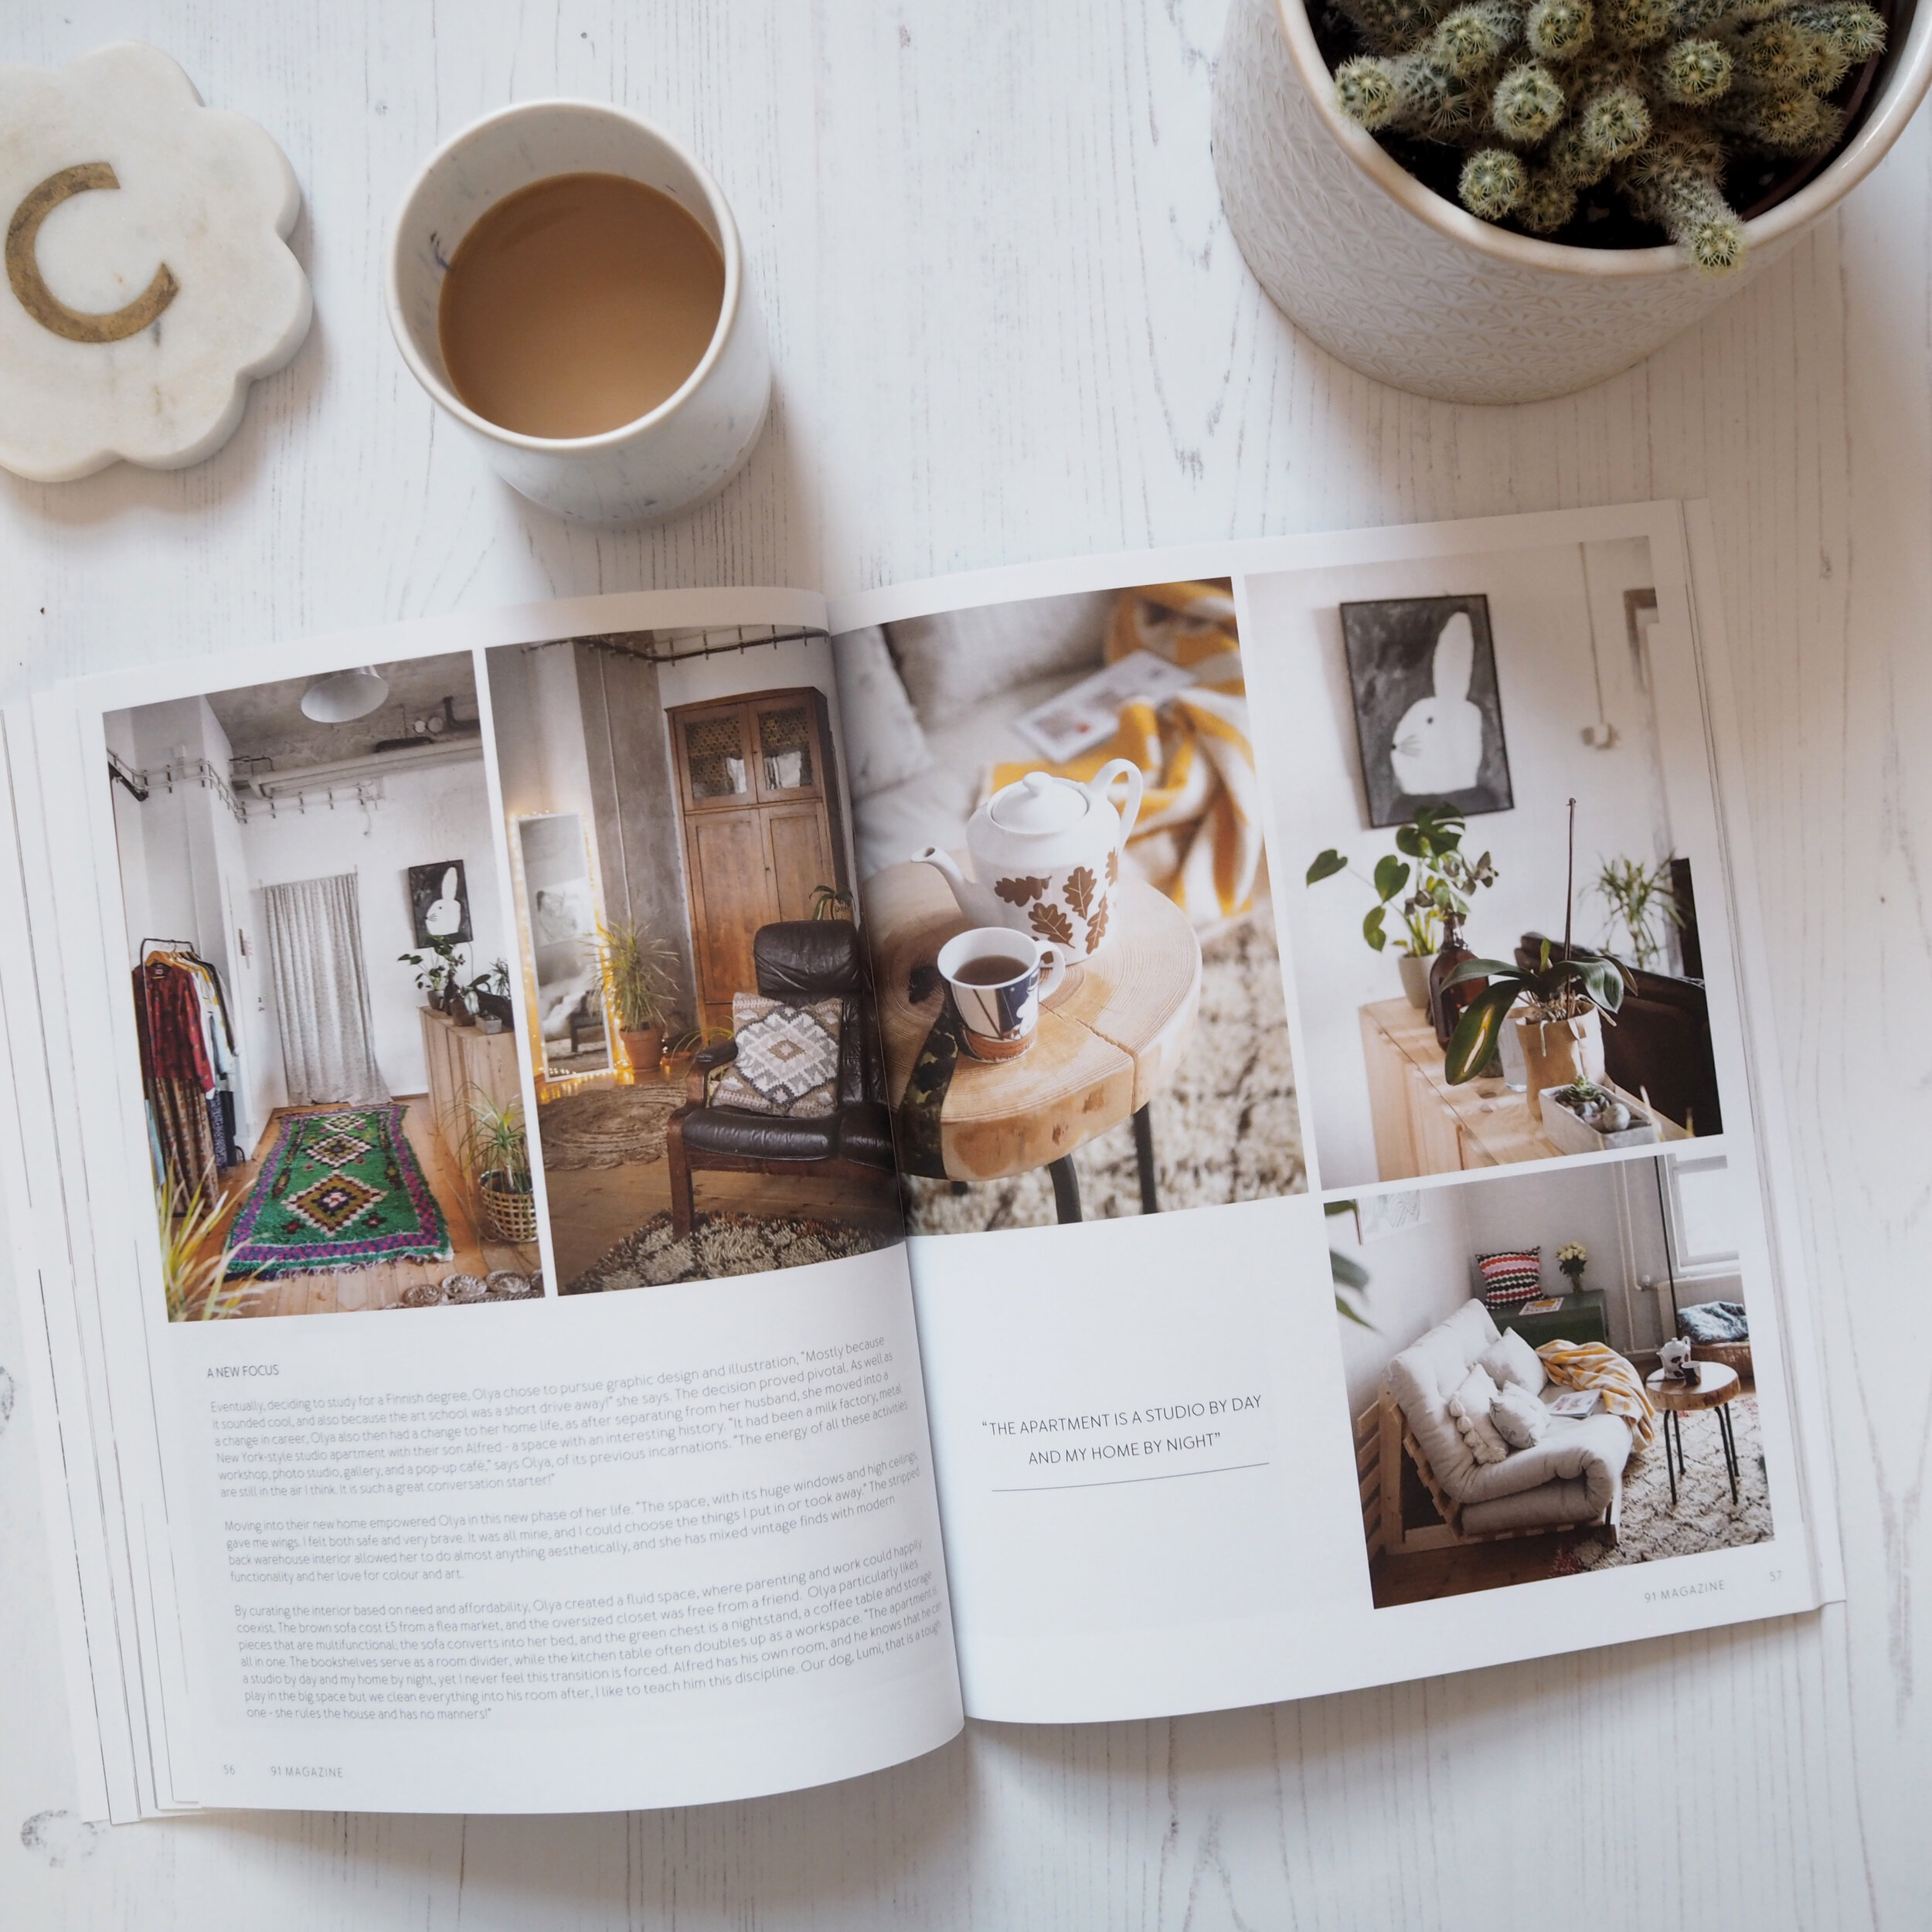 91 Magazine - a UK interiors magazine, featuring the homes and spaces of creative people.